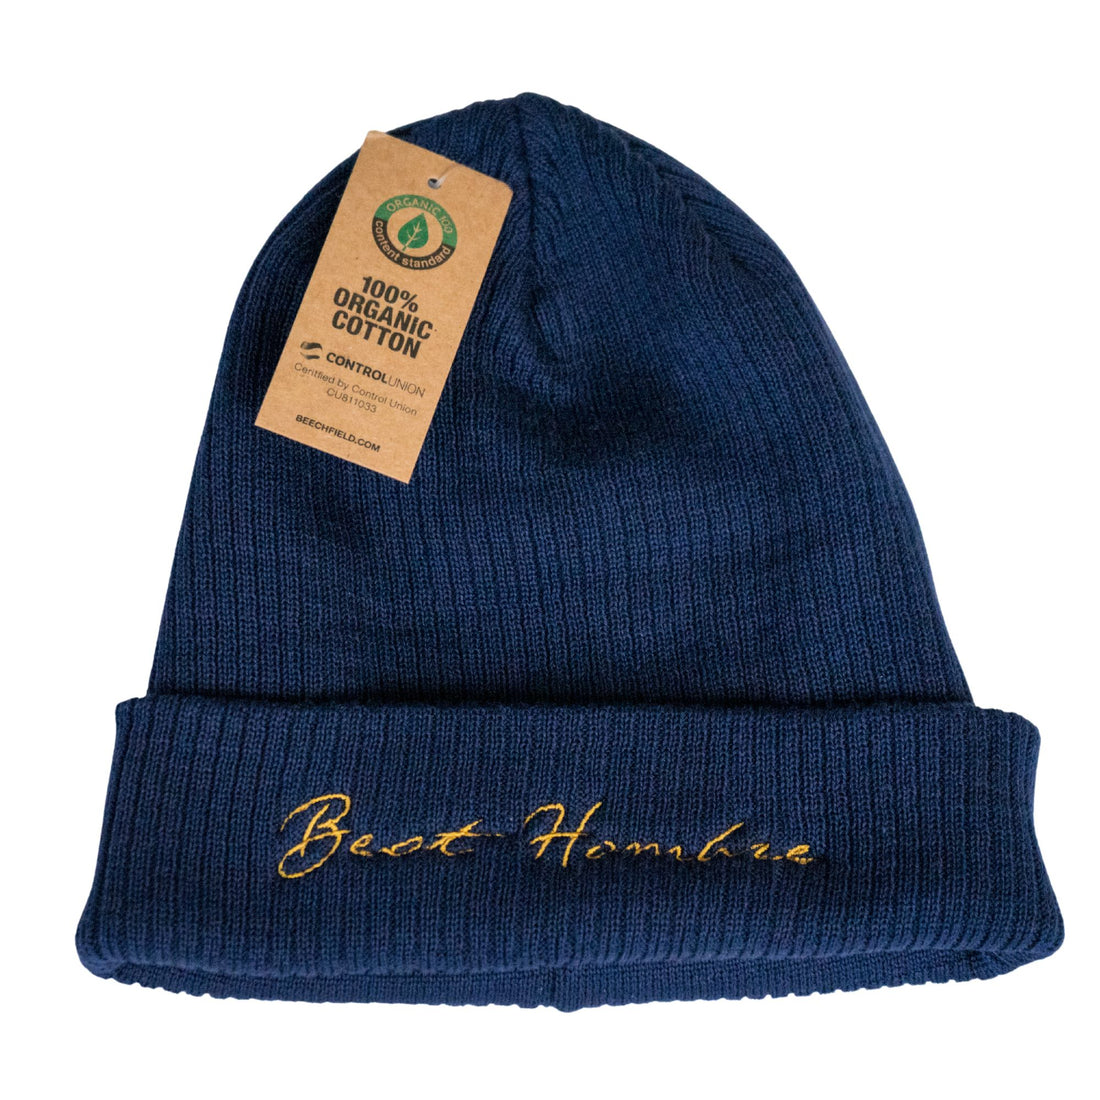 Just Arrived: 100% Organic Cotton Ribbed Beanie w/ Cuff